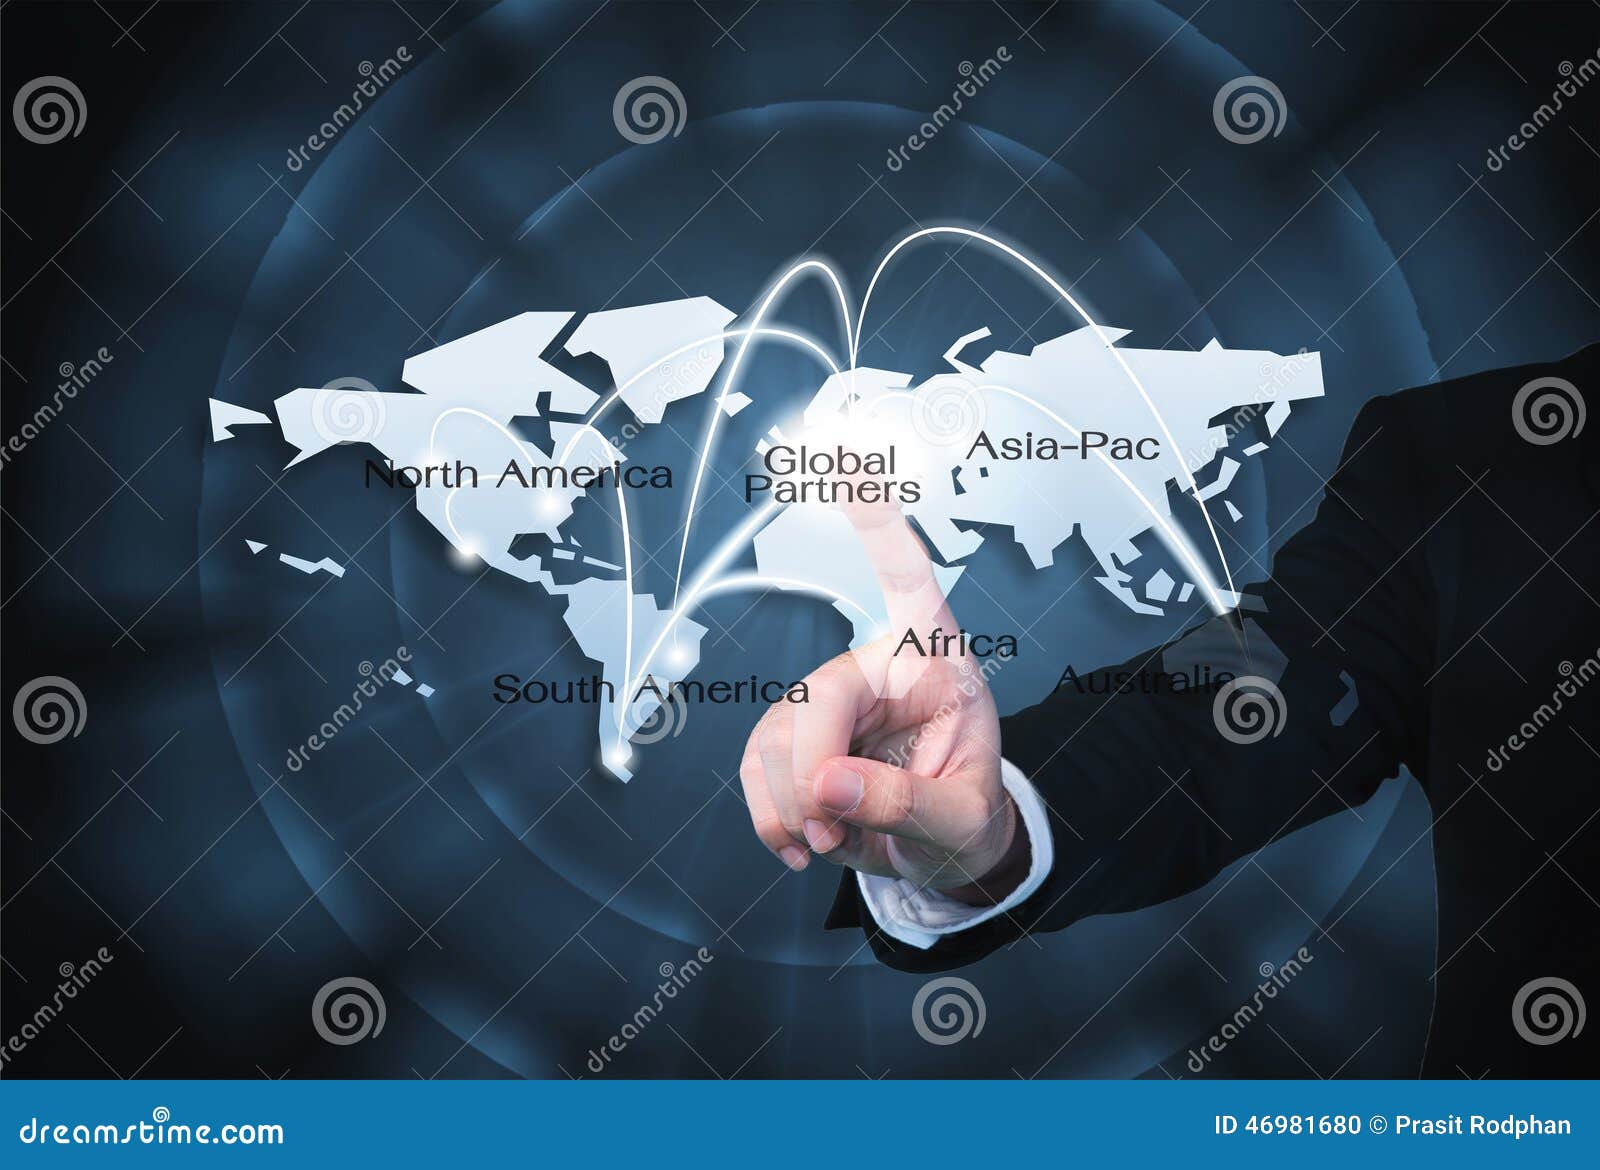 global partners graphic use for import/export background